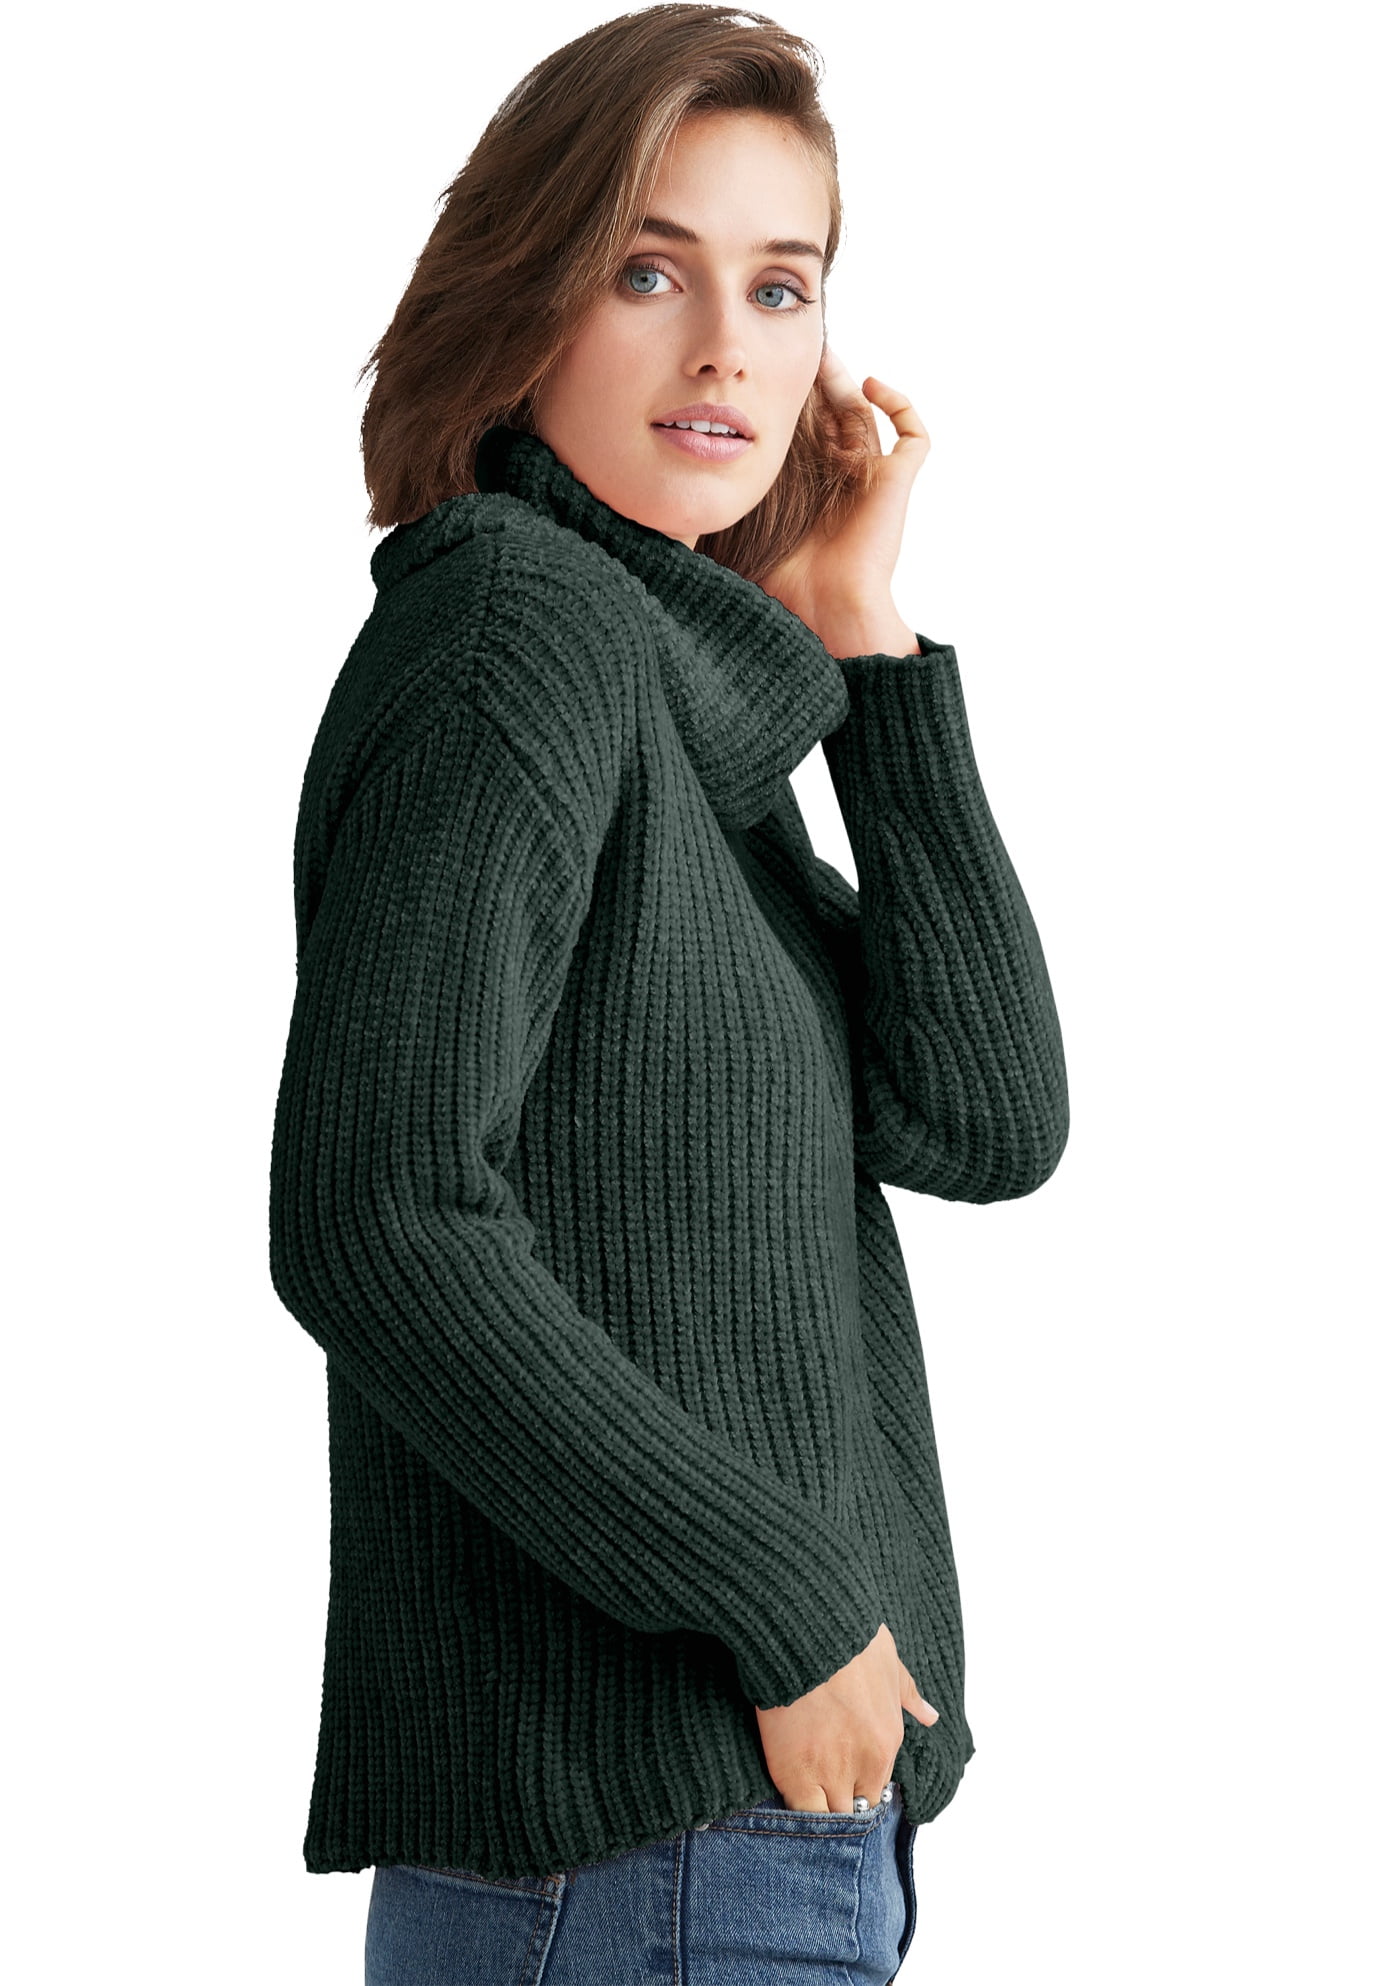 Women's Sweaters of Different Styles – Telegraph